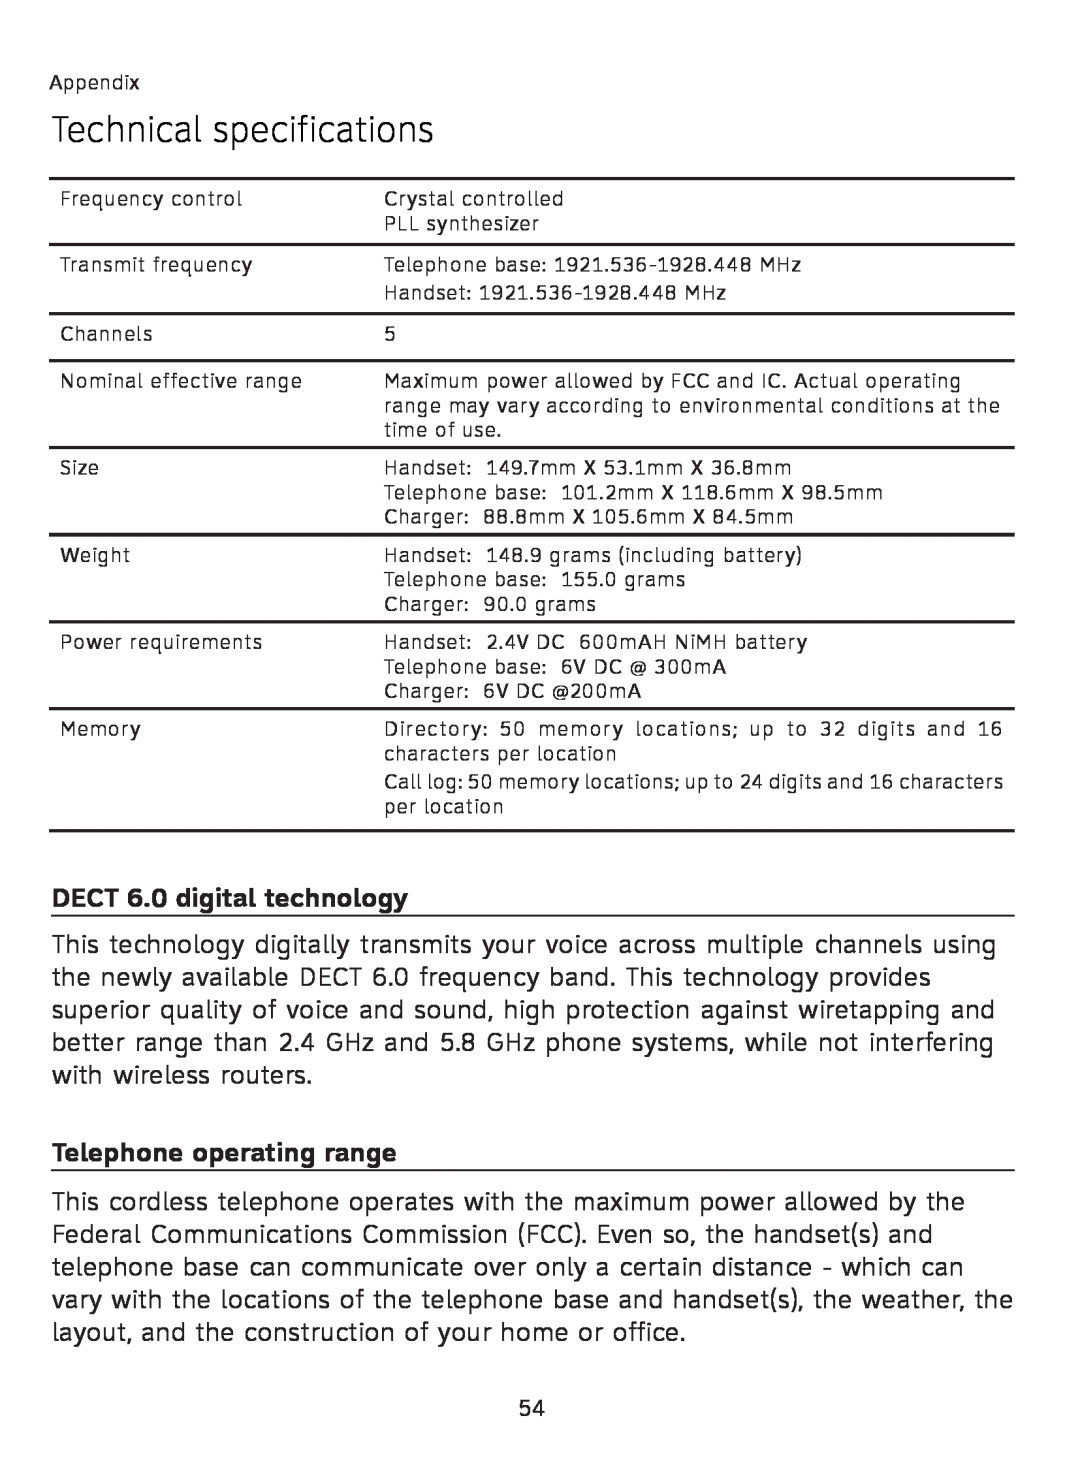 AT&T AT3111-2 user manual Technical specifications, DECT 6.0 digital technology, Telephone operating range 